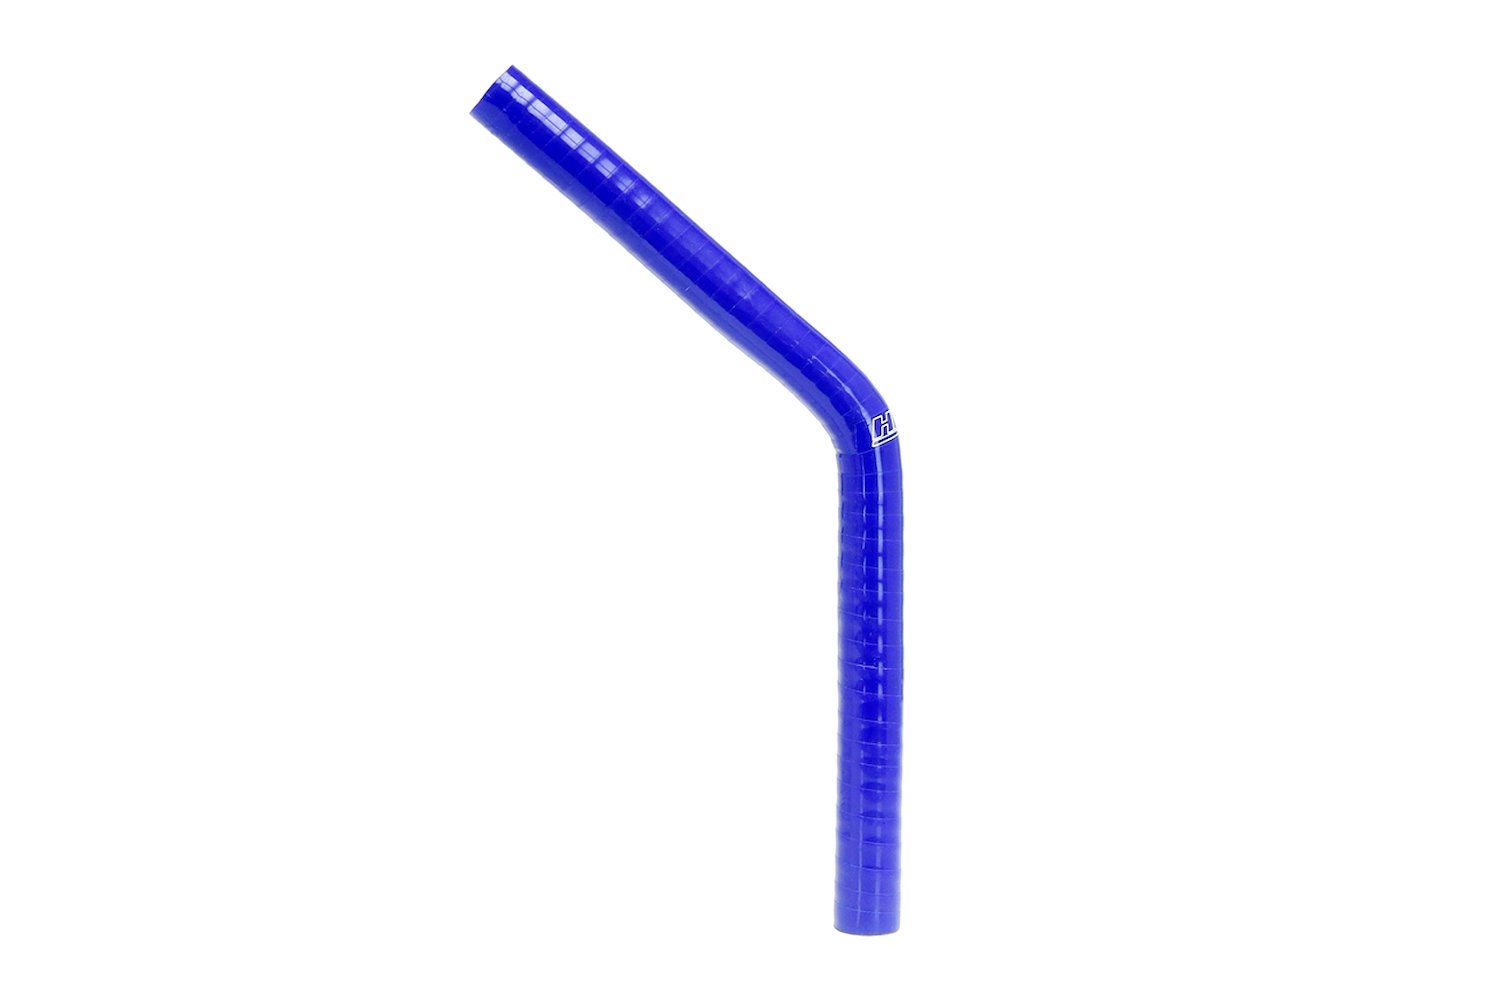 HTSEC45-087-BLUE Silicone 45-Degree Elbow Coupler Hose, High-Temp 4-Ply Reinforced, 7/8 in. ID, Blue